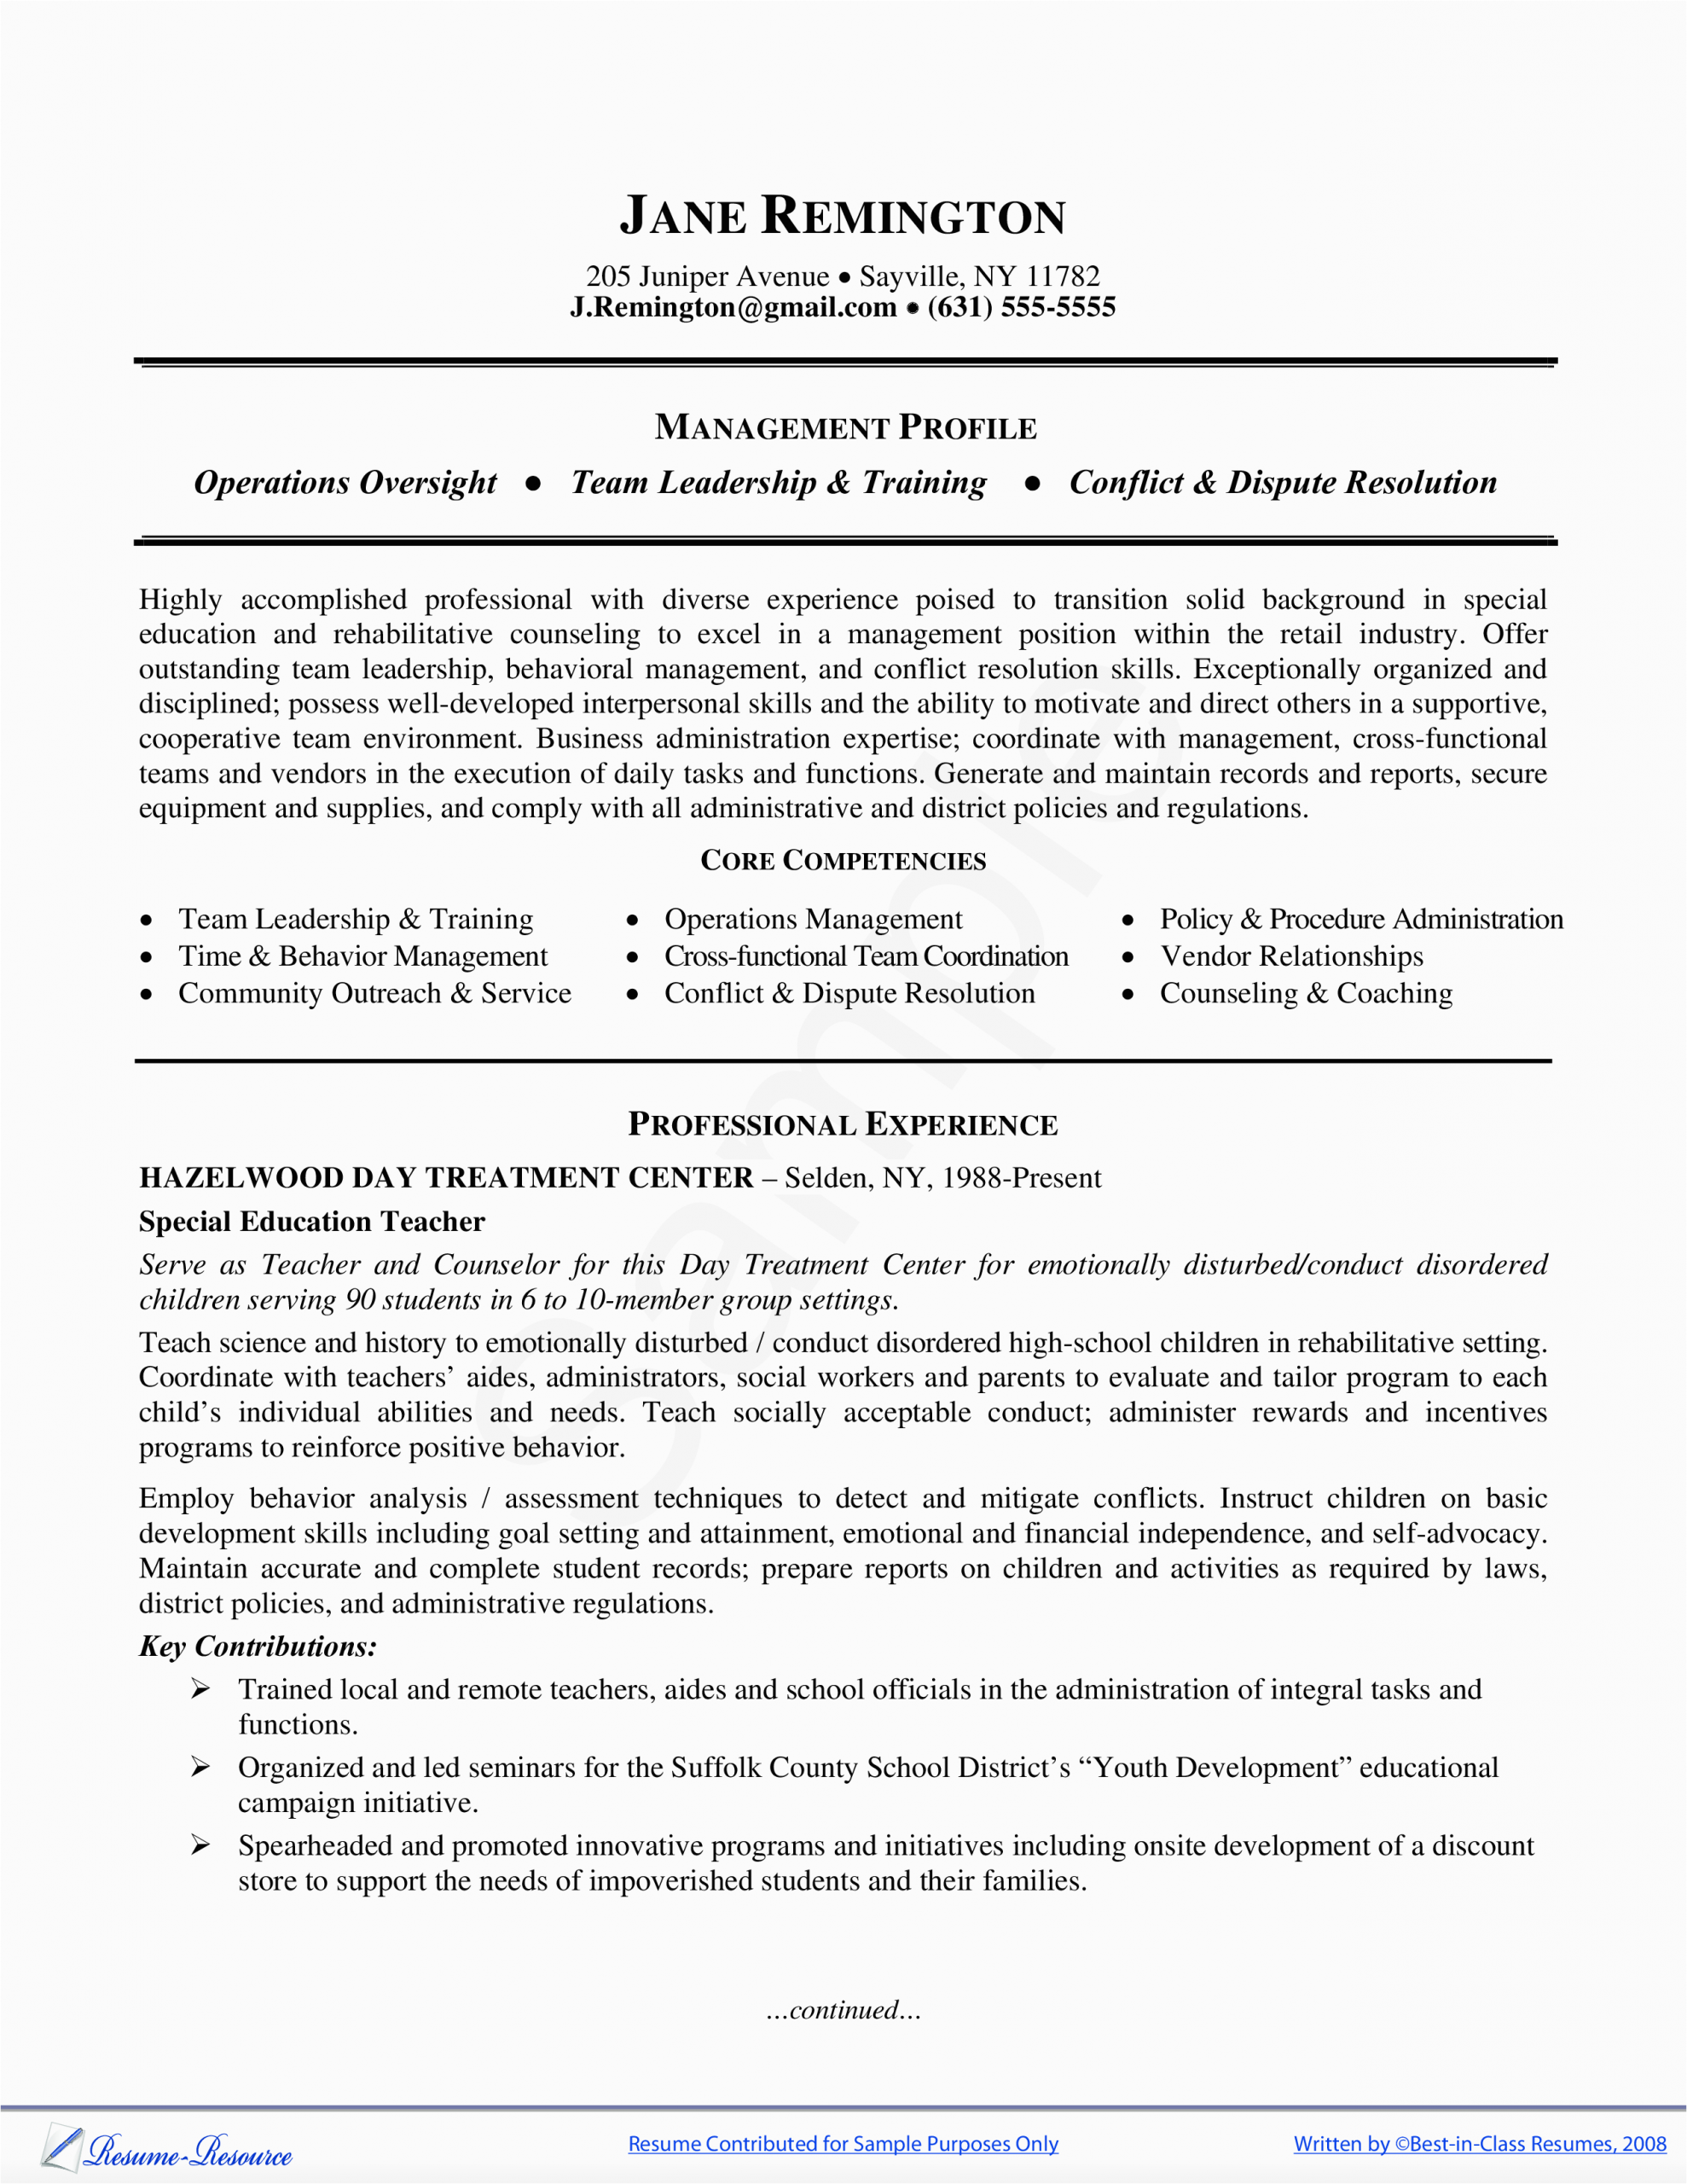 Functional Resume Template for Career Change Career Change Functional Resume Examples Best Resume Ideas